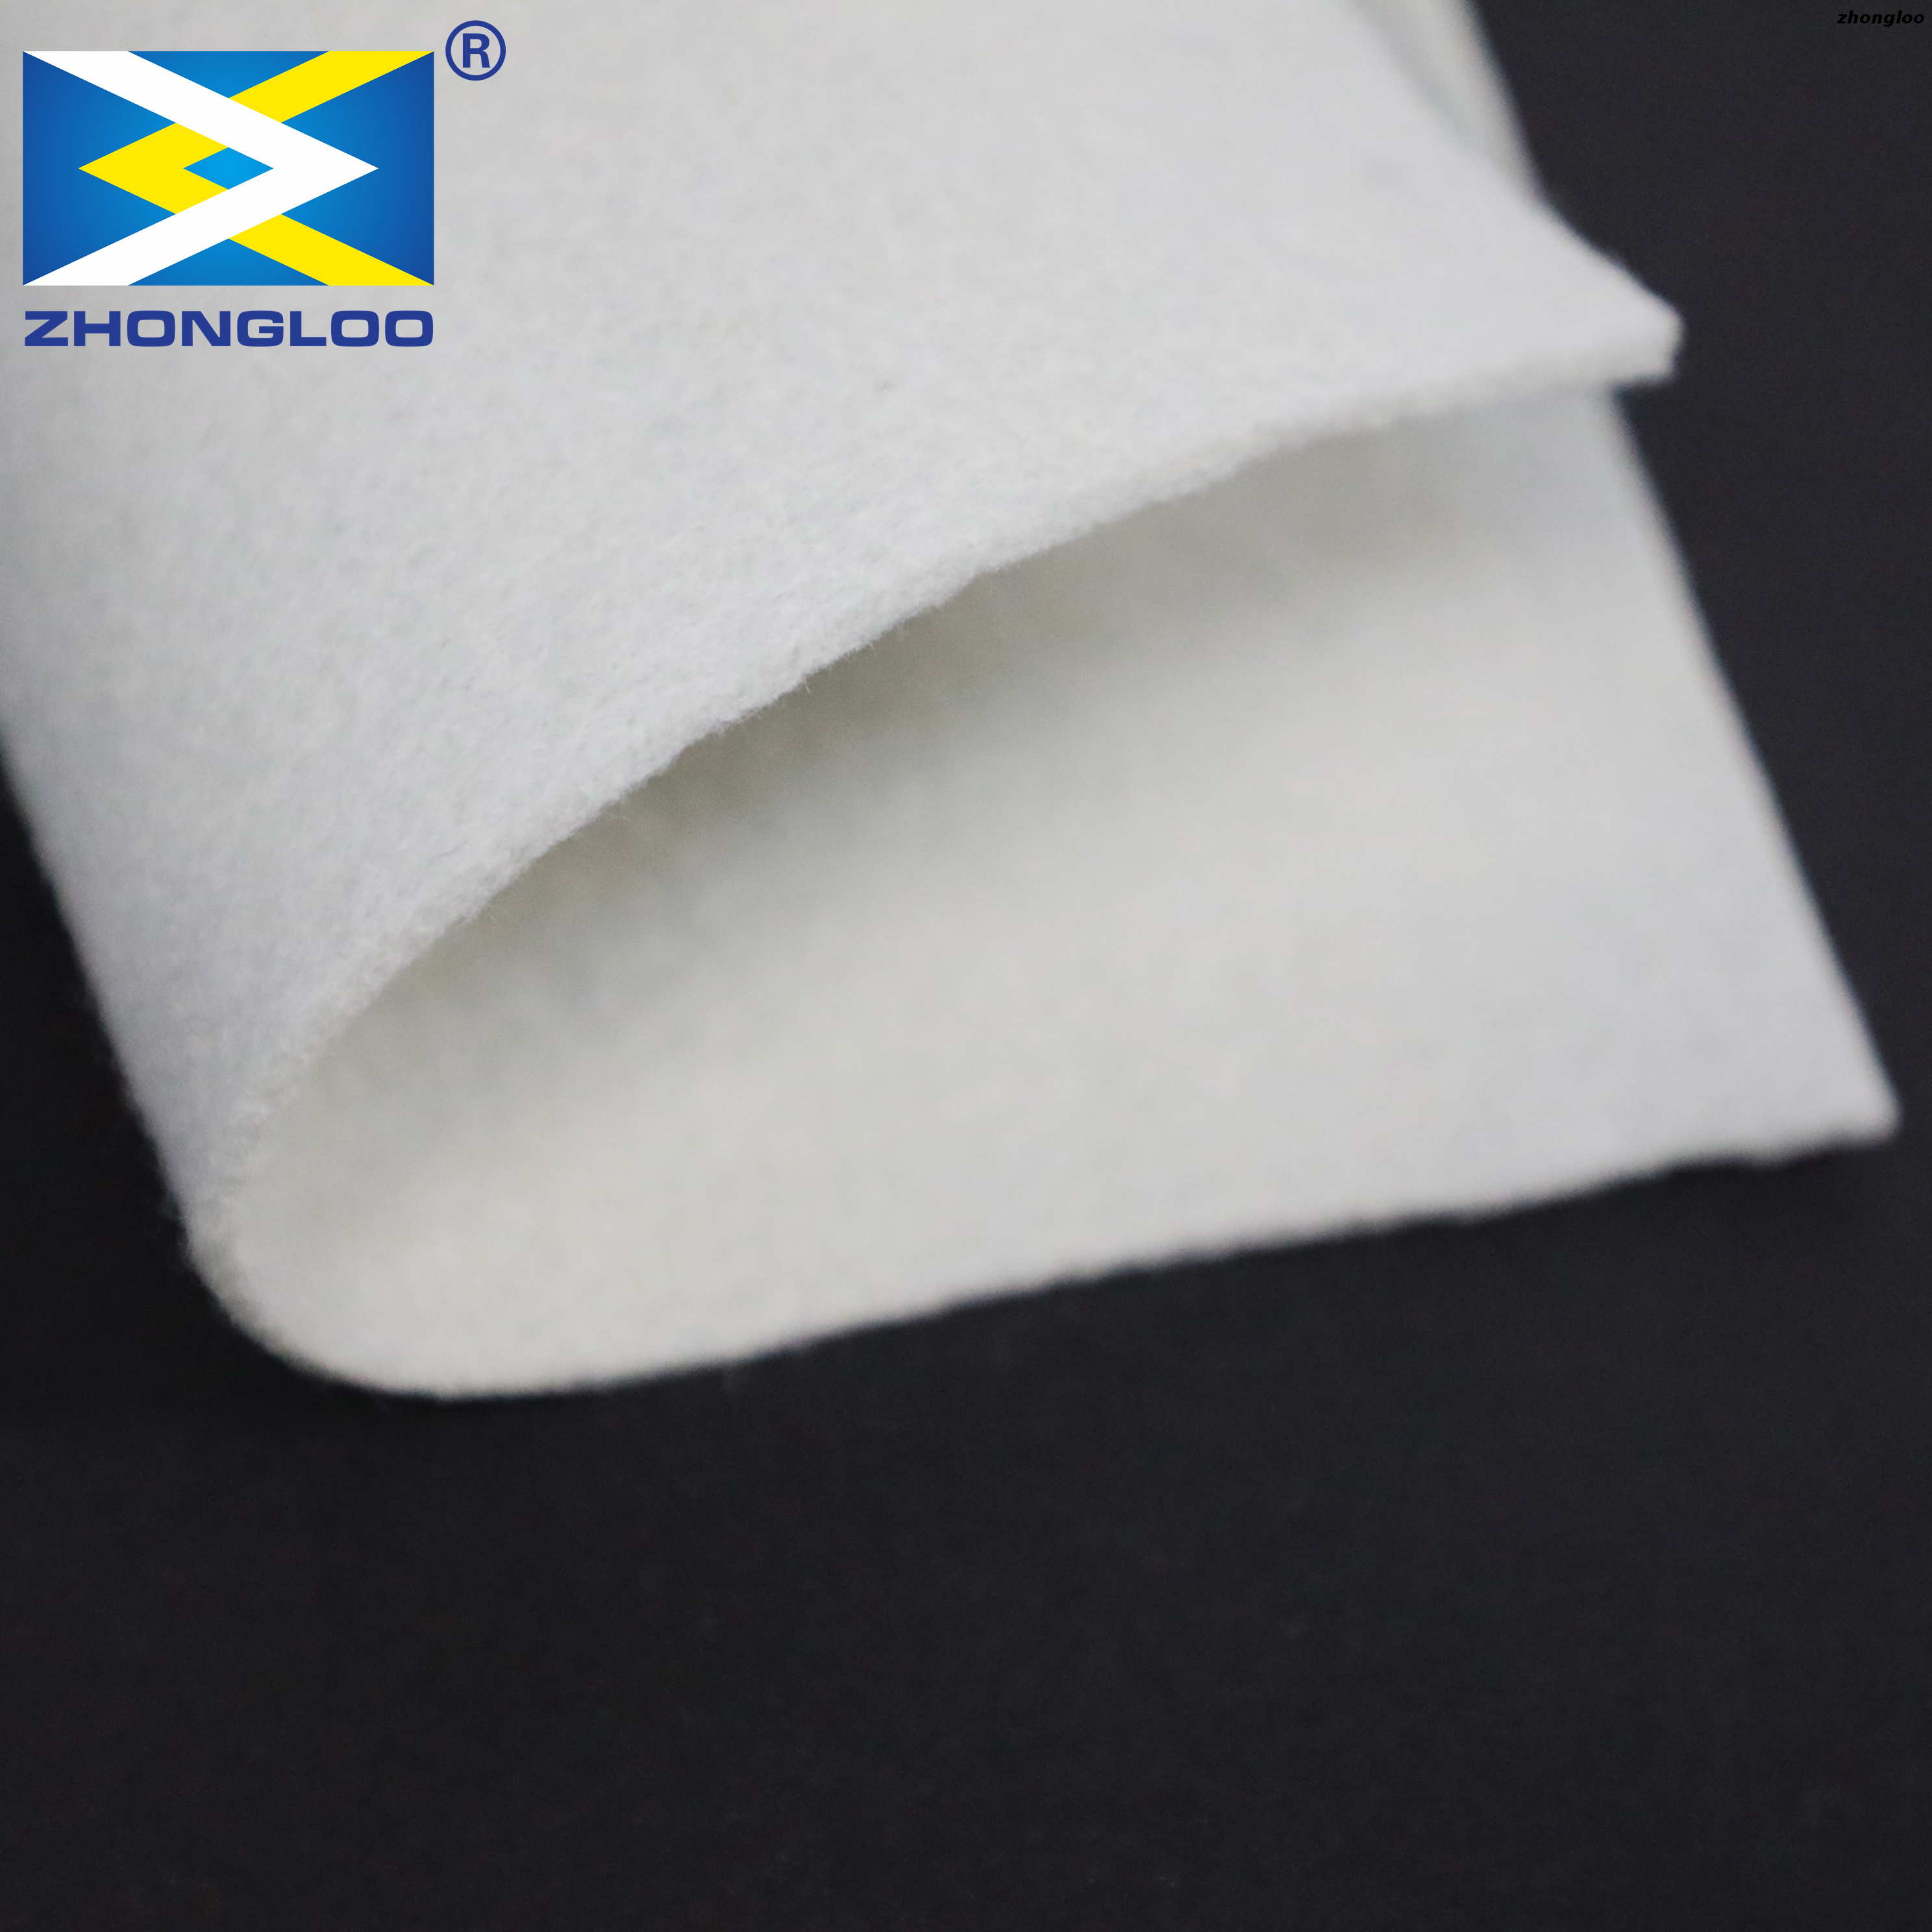 Zhongloo Polypropylene Nonwoven Geotextile 200gsm/300gsm/400gsm/Customized Fabric Price